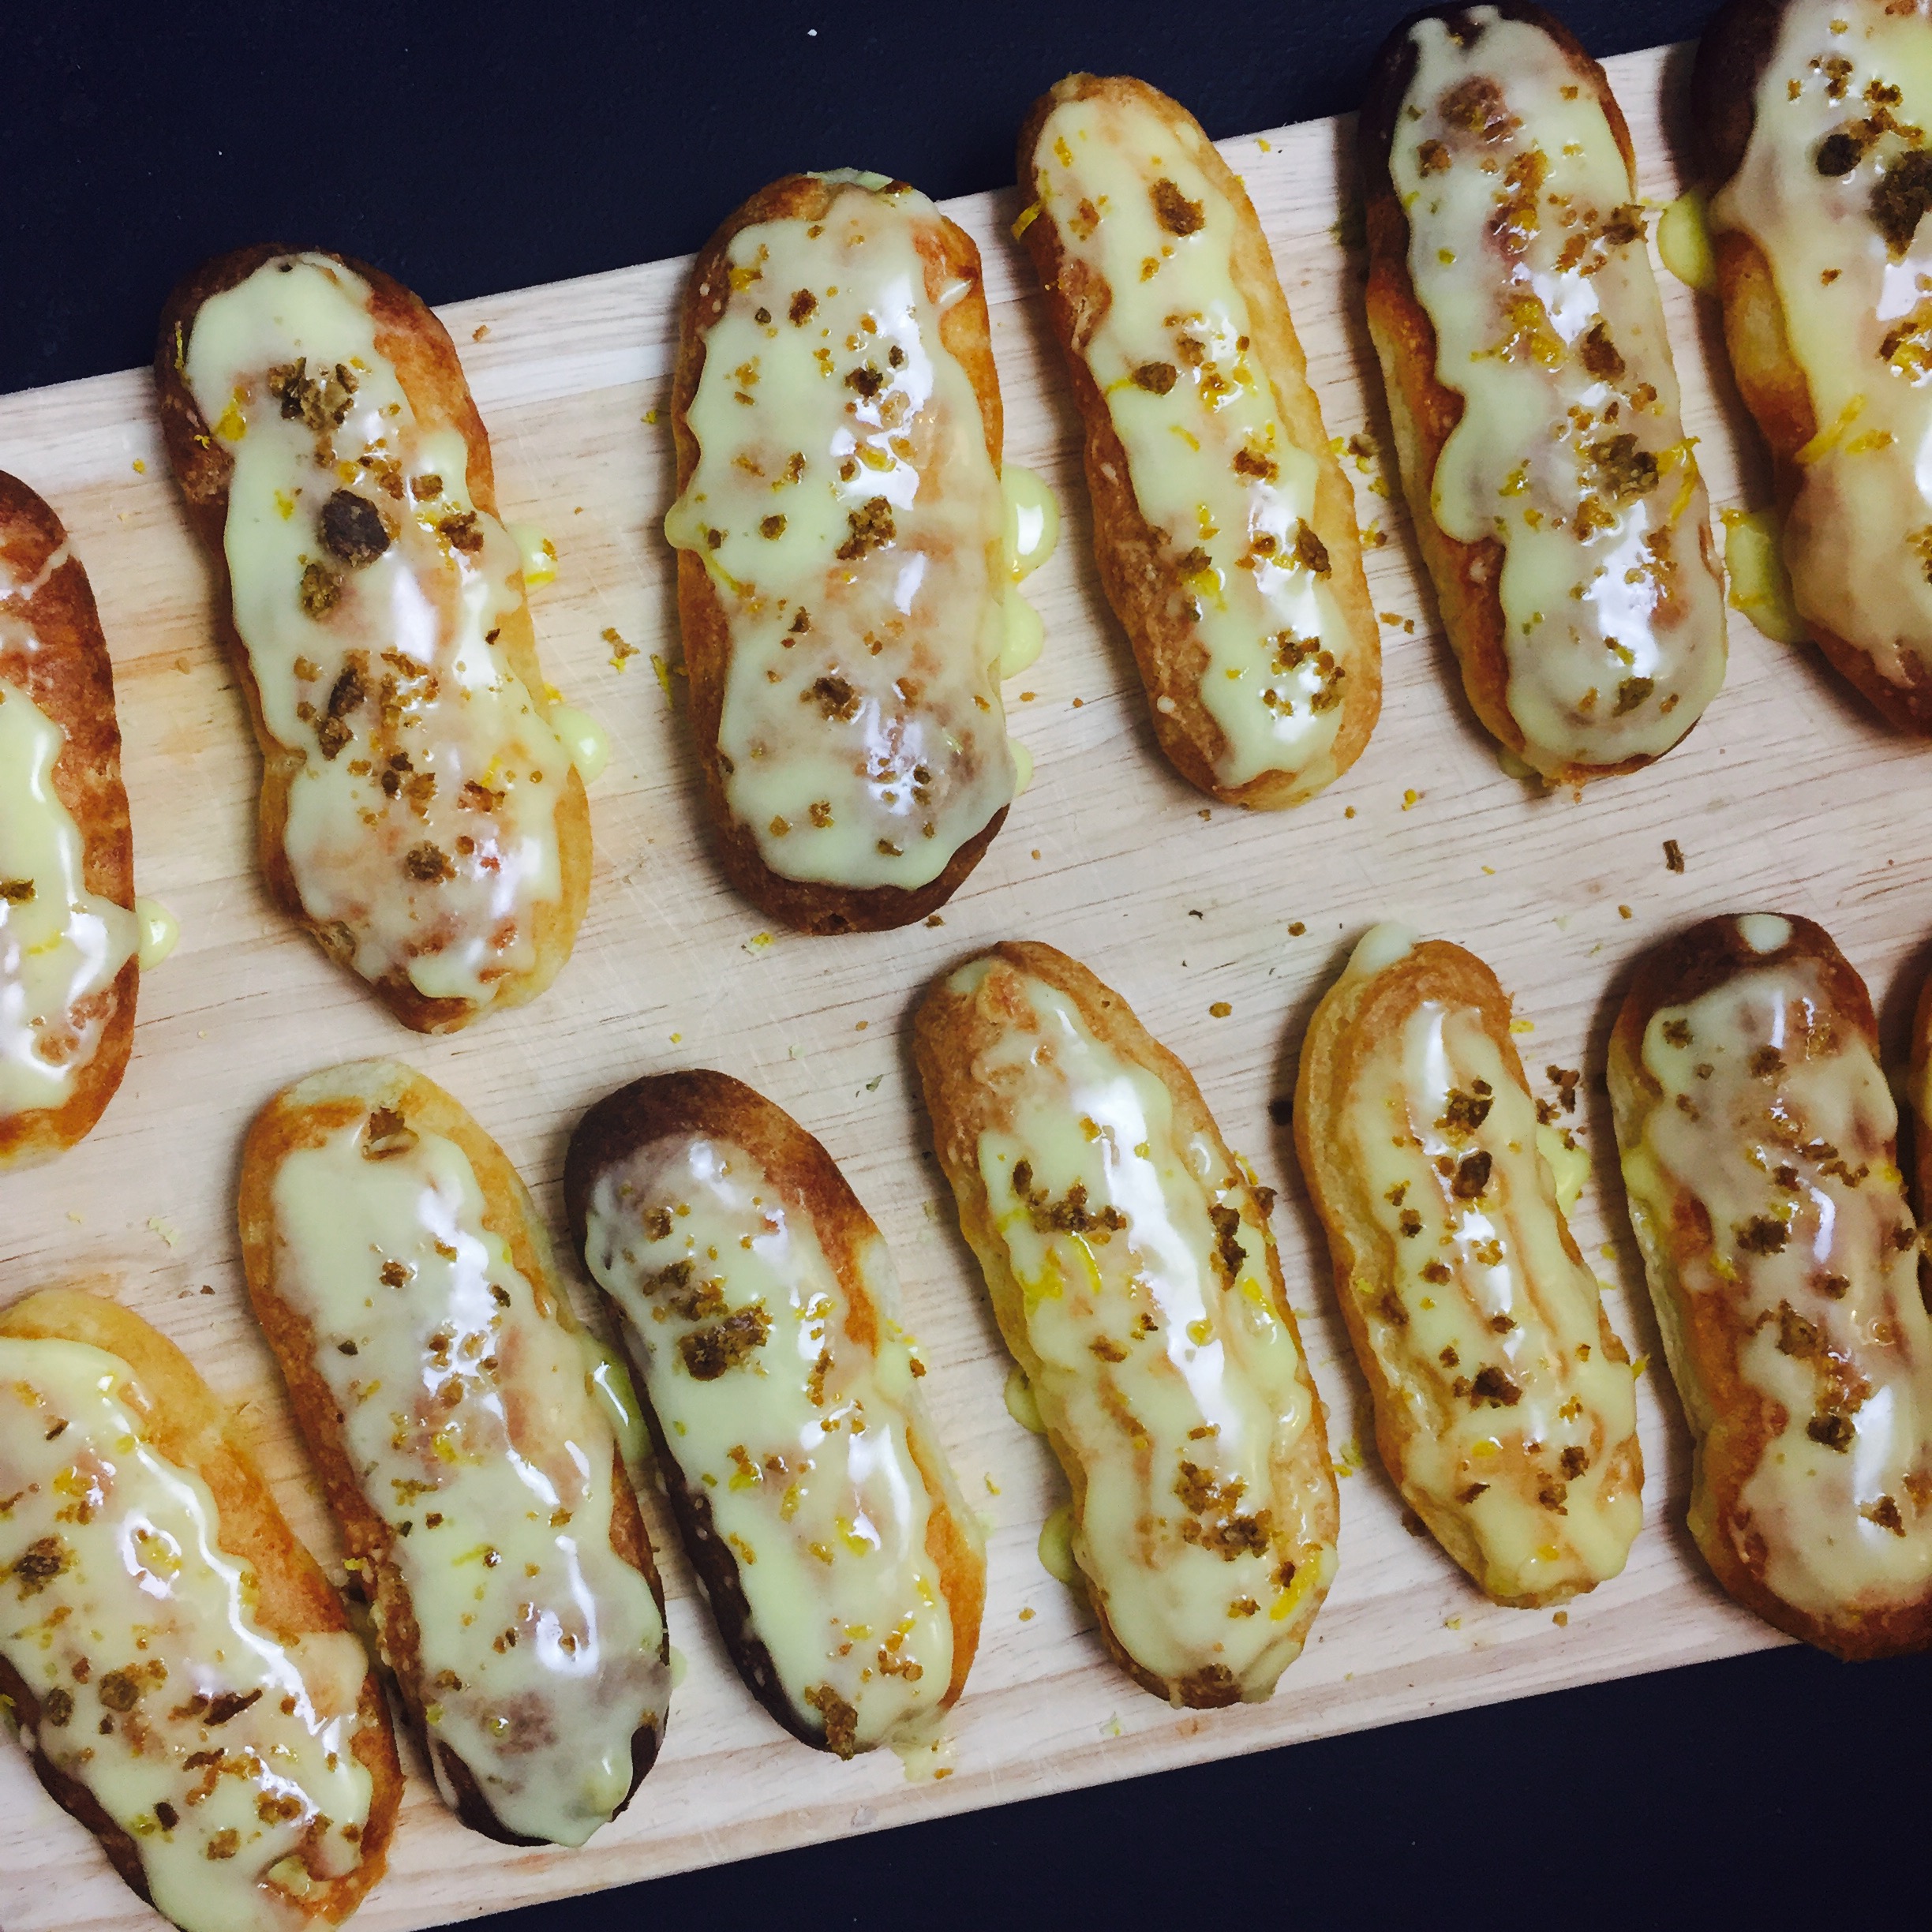 Deconstructed Vodka Martini éclairs with green olive powder